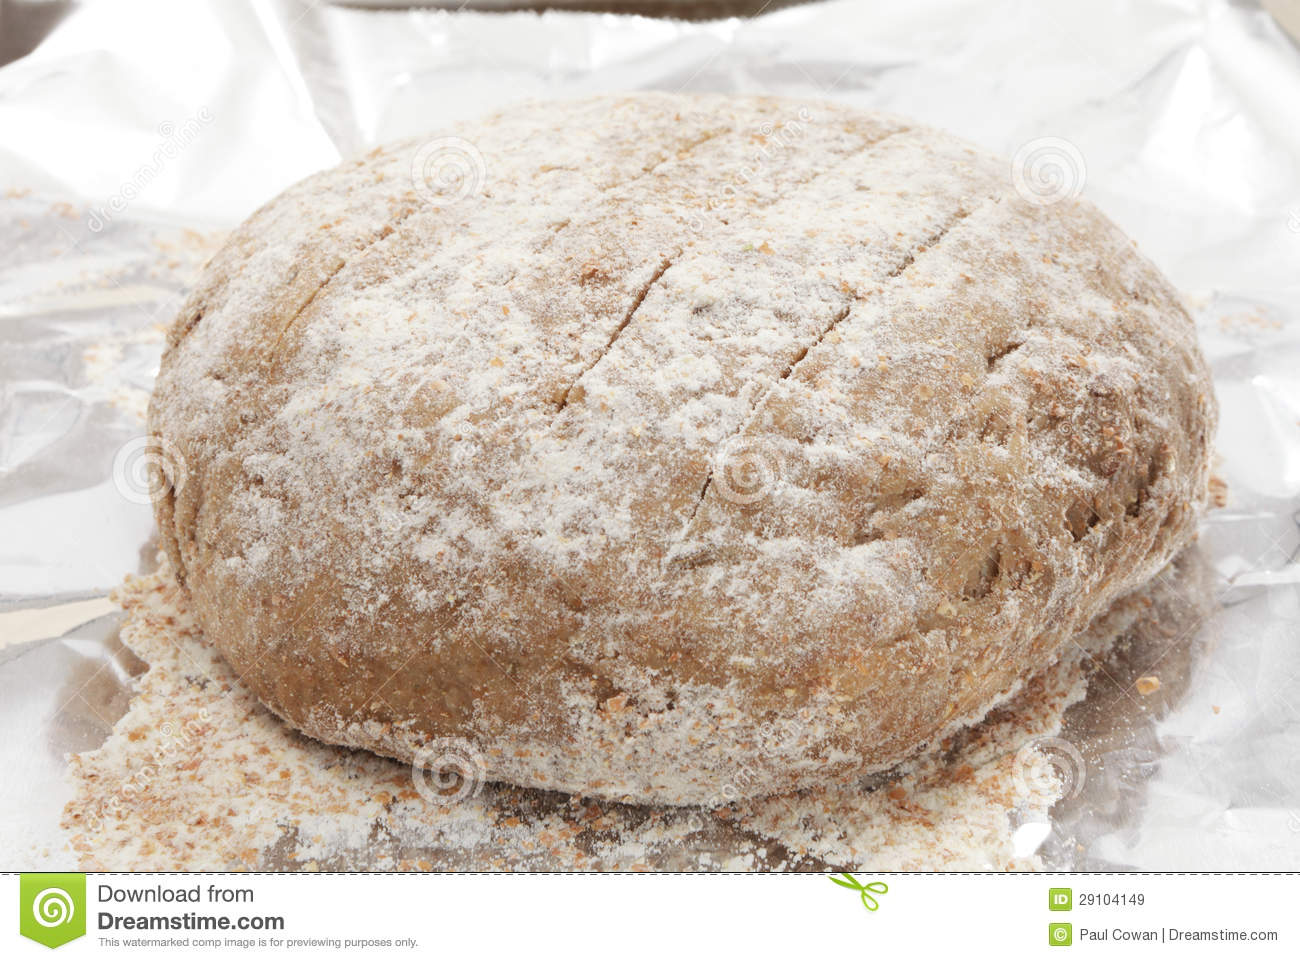 Ball Of Polish Rye Bread Dough Rising On A Sheet Of Tinfoil On A